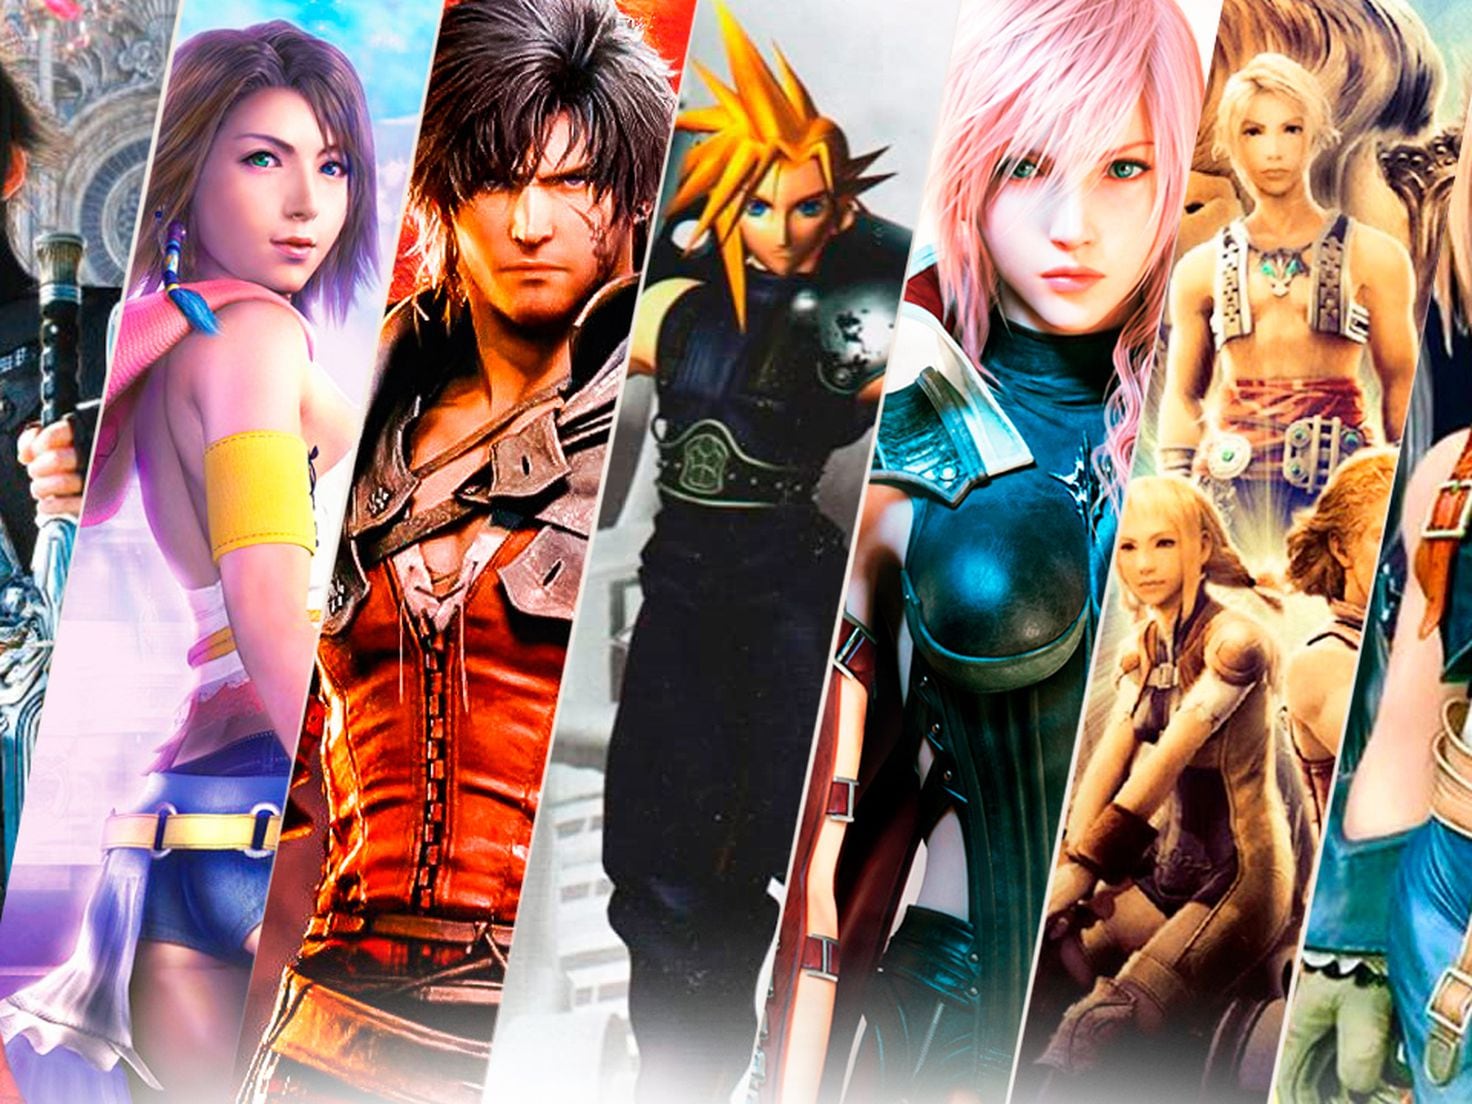 The 15 best Final Fantasy games in the series, from worst to best -  Meristation